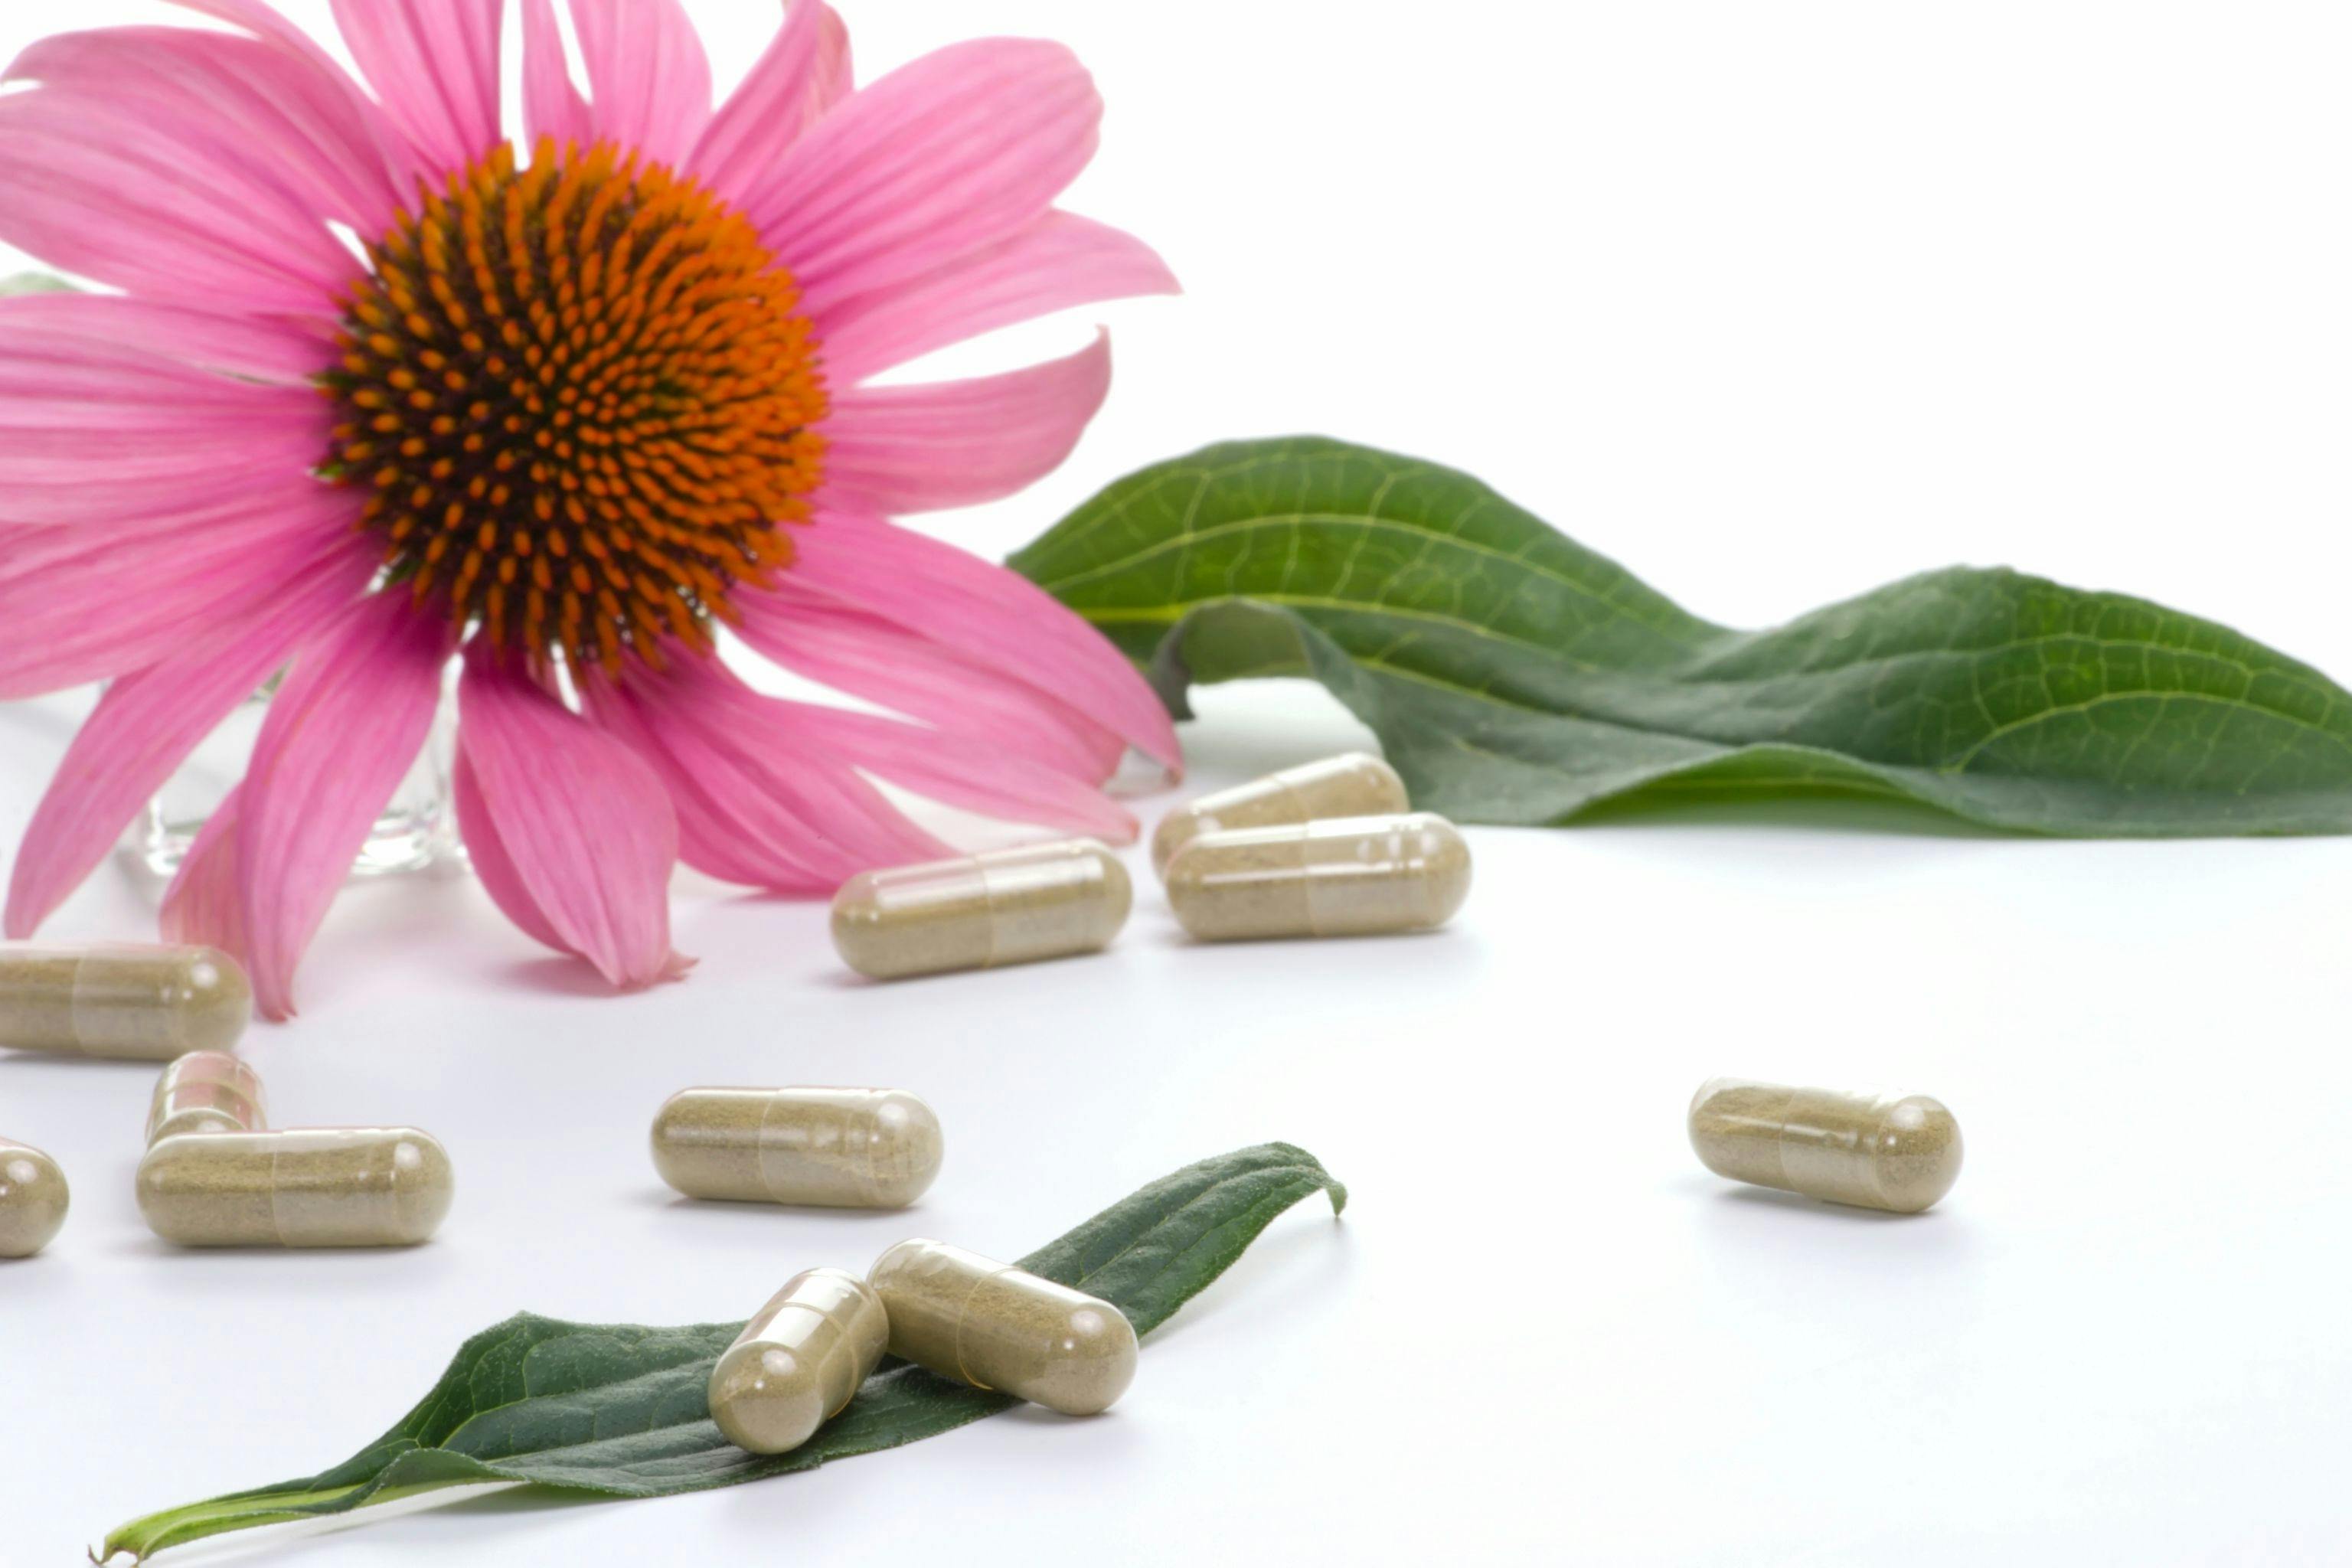 Echinacea Ingredient Boosts Immune Function in Stress-Induced Mice, Study Suggests